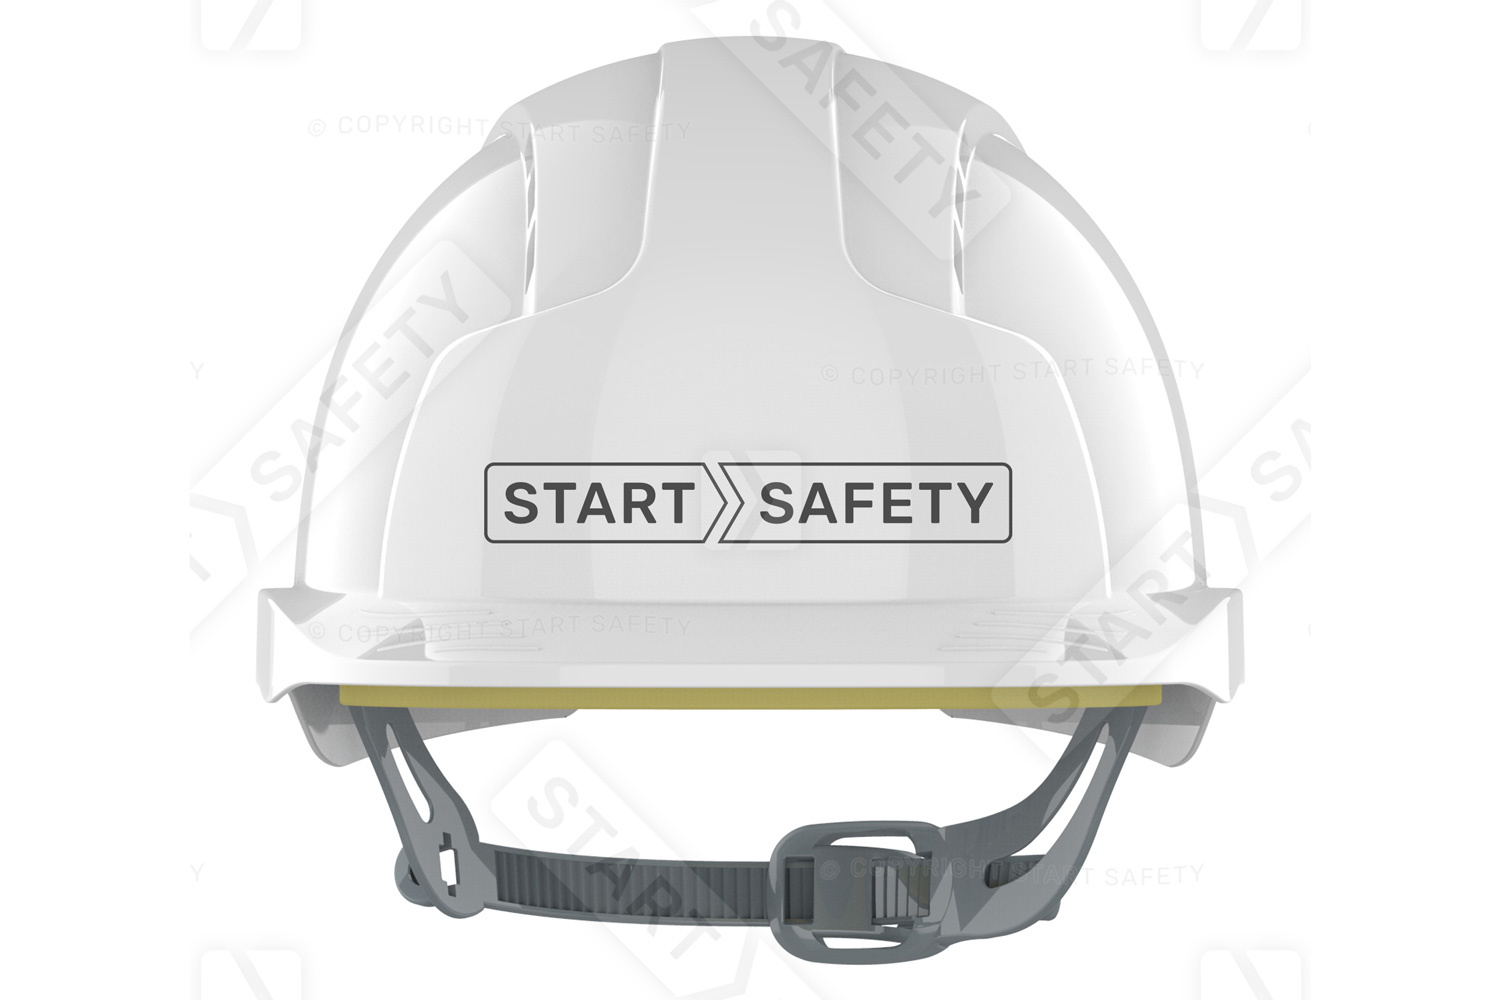 Hard Hat With Company's Branding